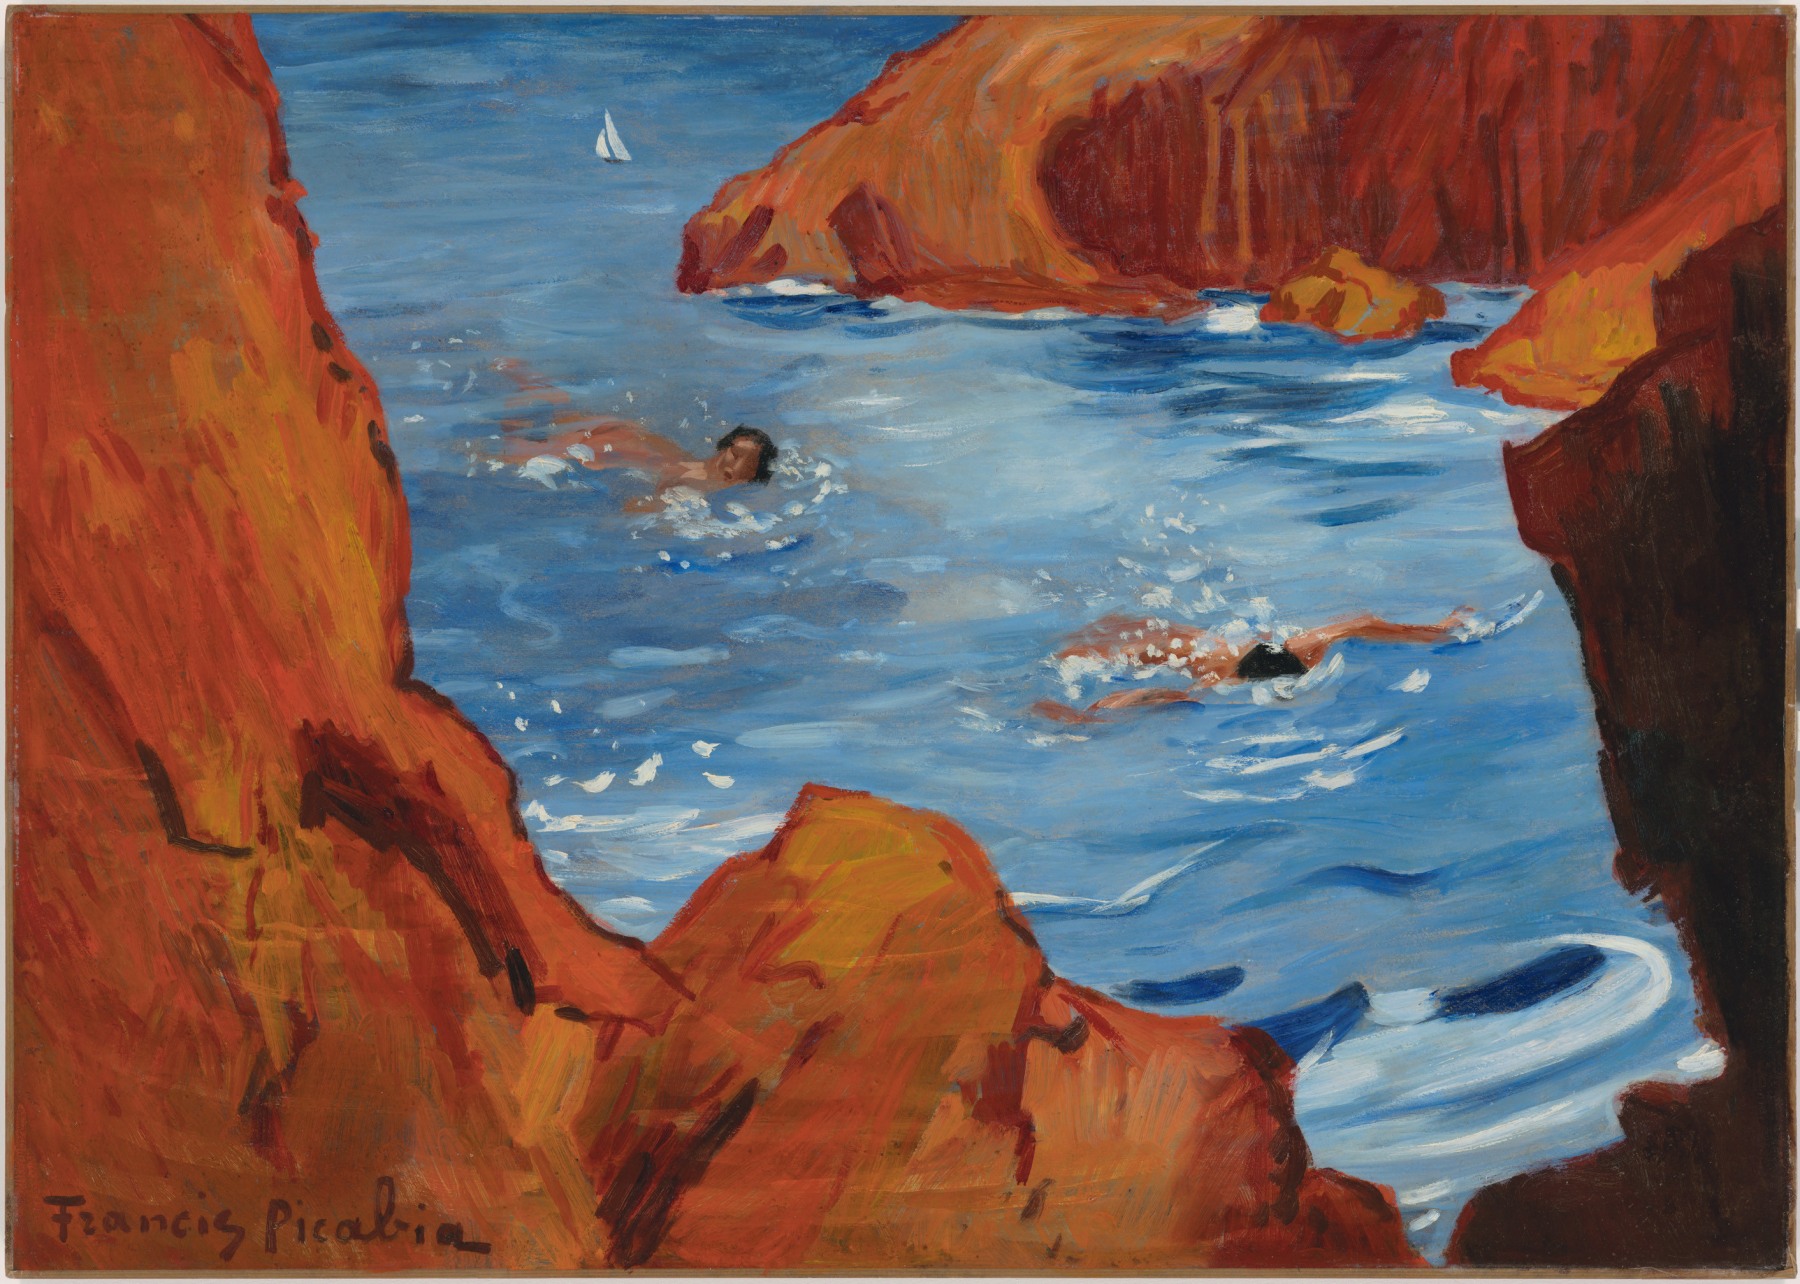 Francis Picabia

&amp;ldquo;Les Calanques&amp;rdquo;, ca. 1942-1943

Oil on board mounted on wood

29 3/4 x 41 1/2 inches

75.5 x 105 cm

PIC 213